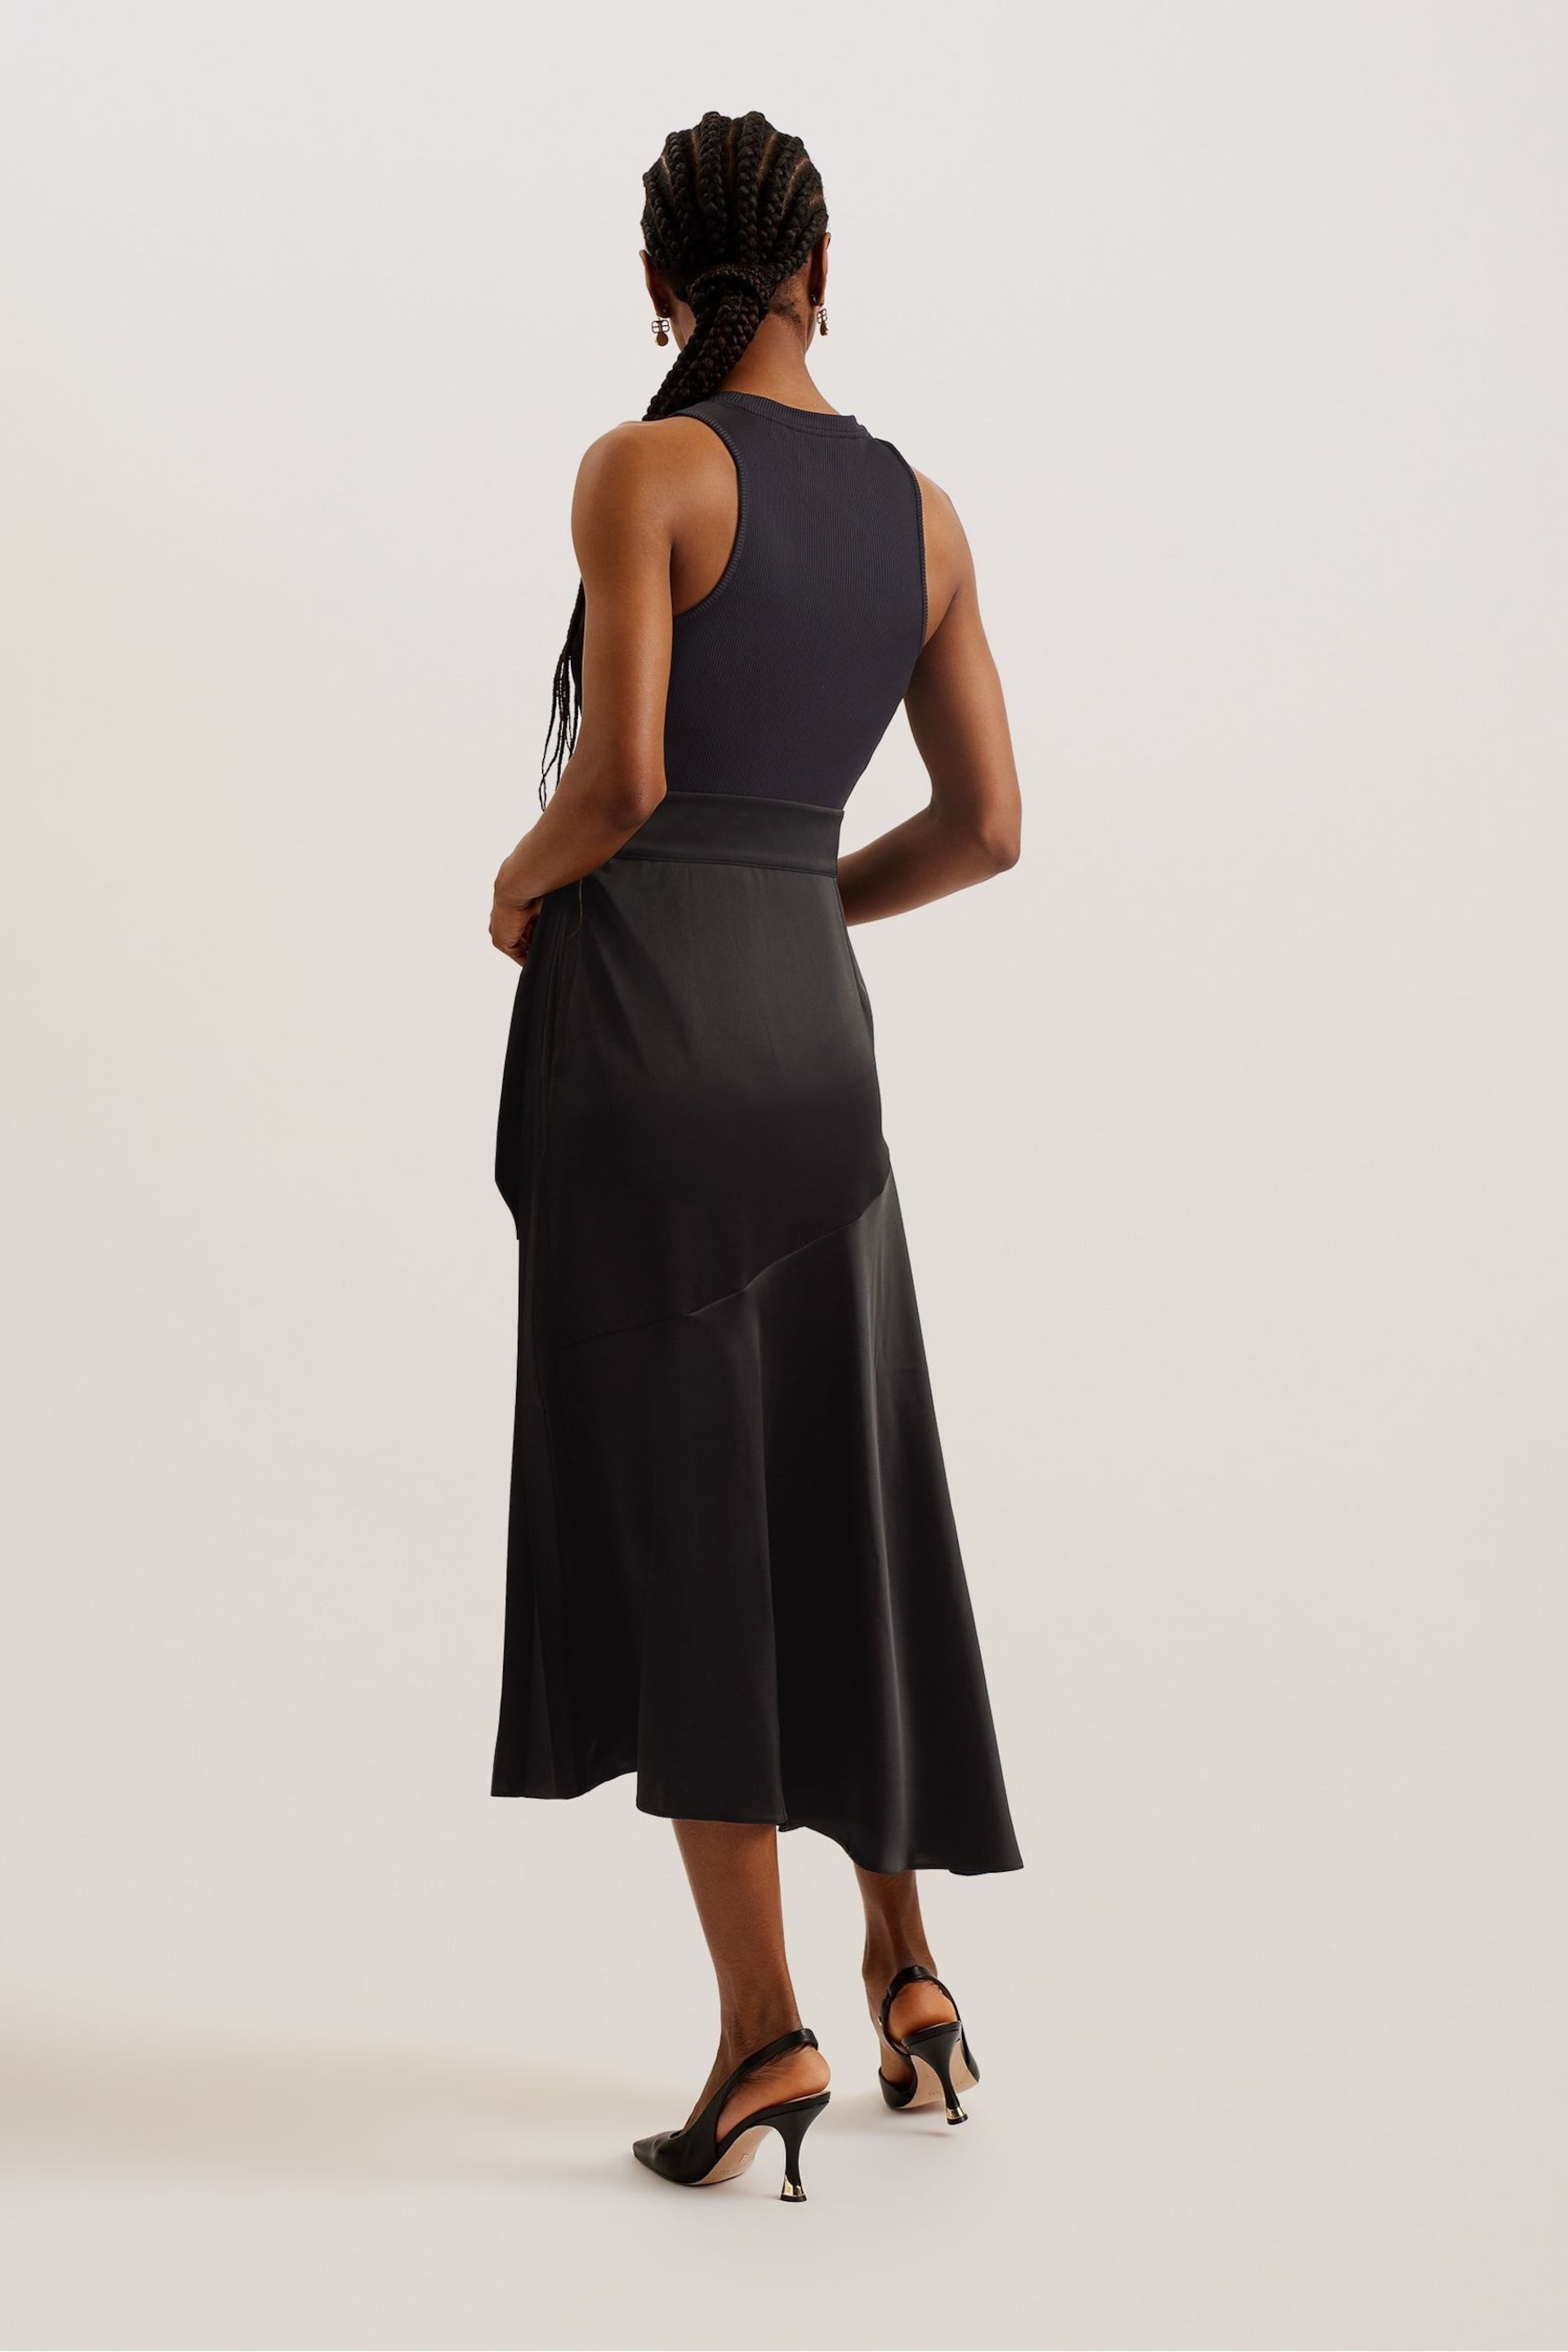 Ted Baker Black Mockable Wiiloww Dress With Racer Bodice - Image 2 of 6